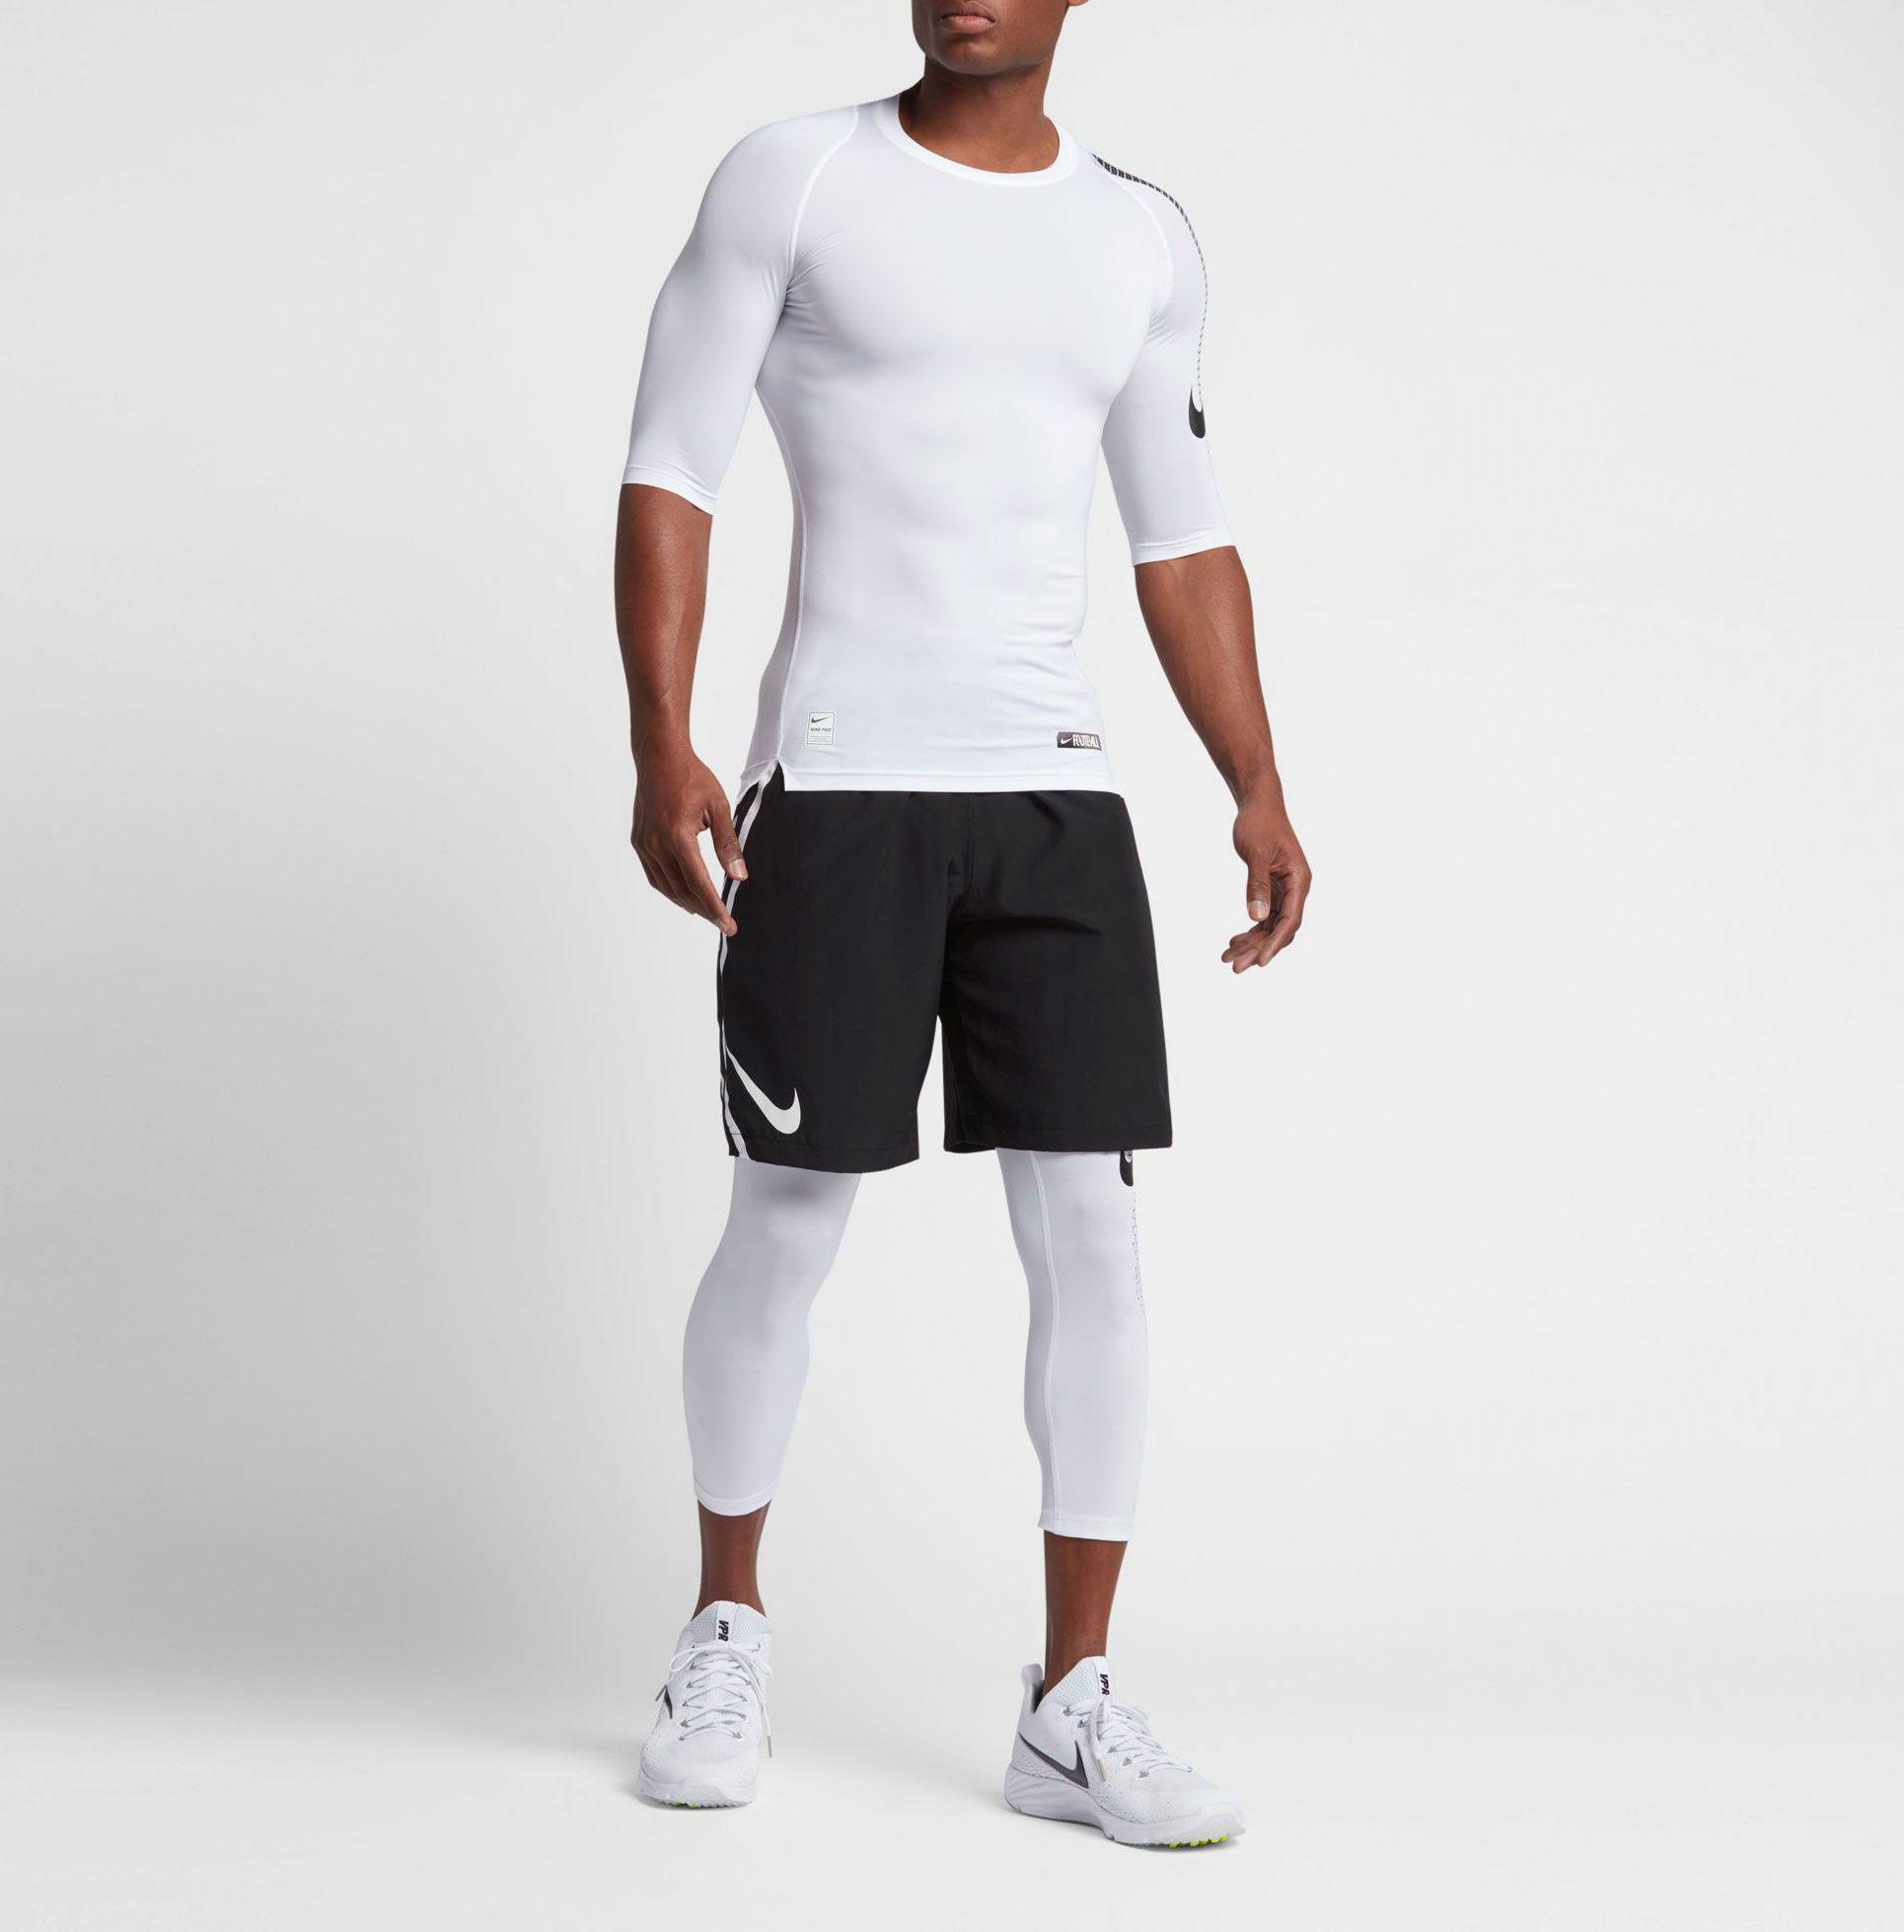 Nike Synthetic Pro Half Sleeve Compression Football Shirt in White/Pale  Grey (White) for Men - Lyst